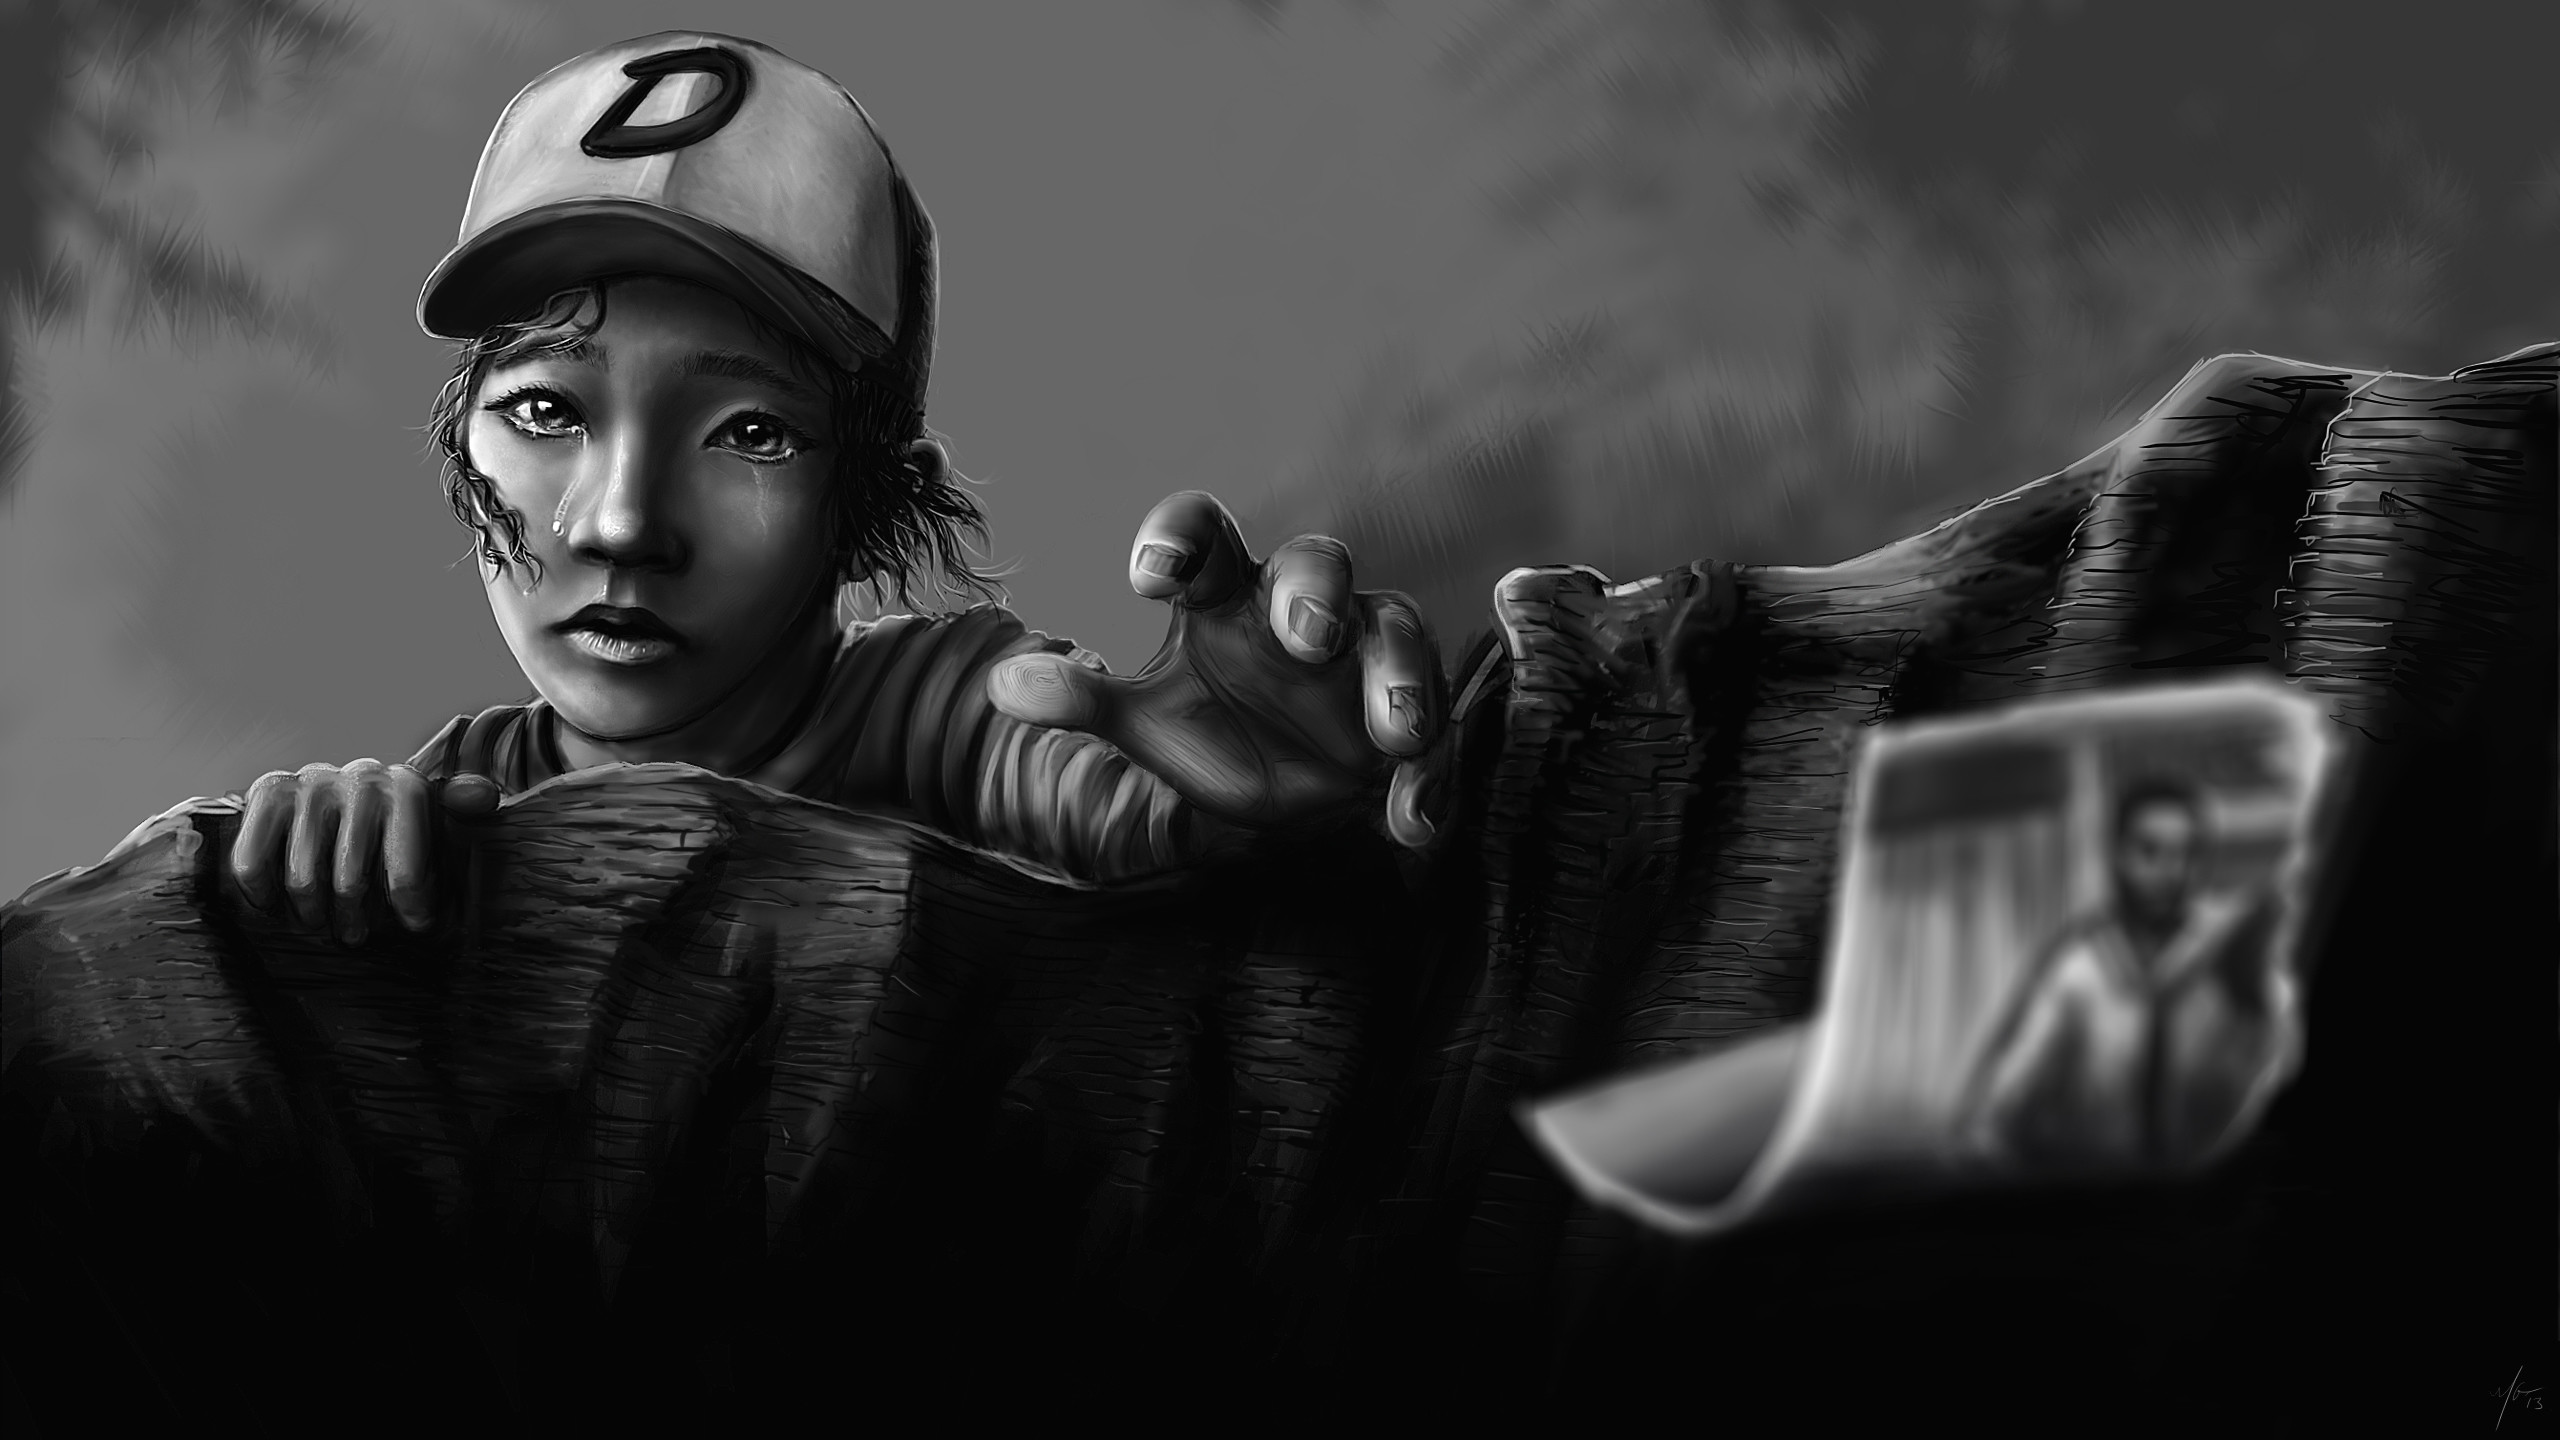 2560x1440 ... Keep that hair short, Clem... I'll miss you. by